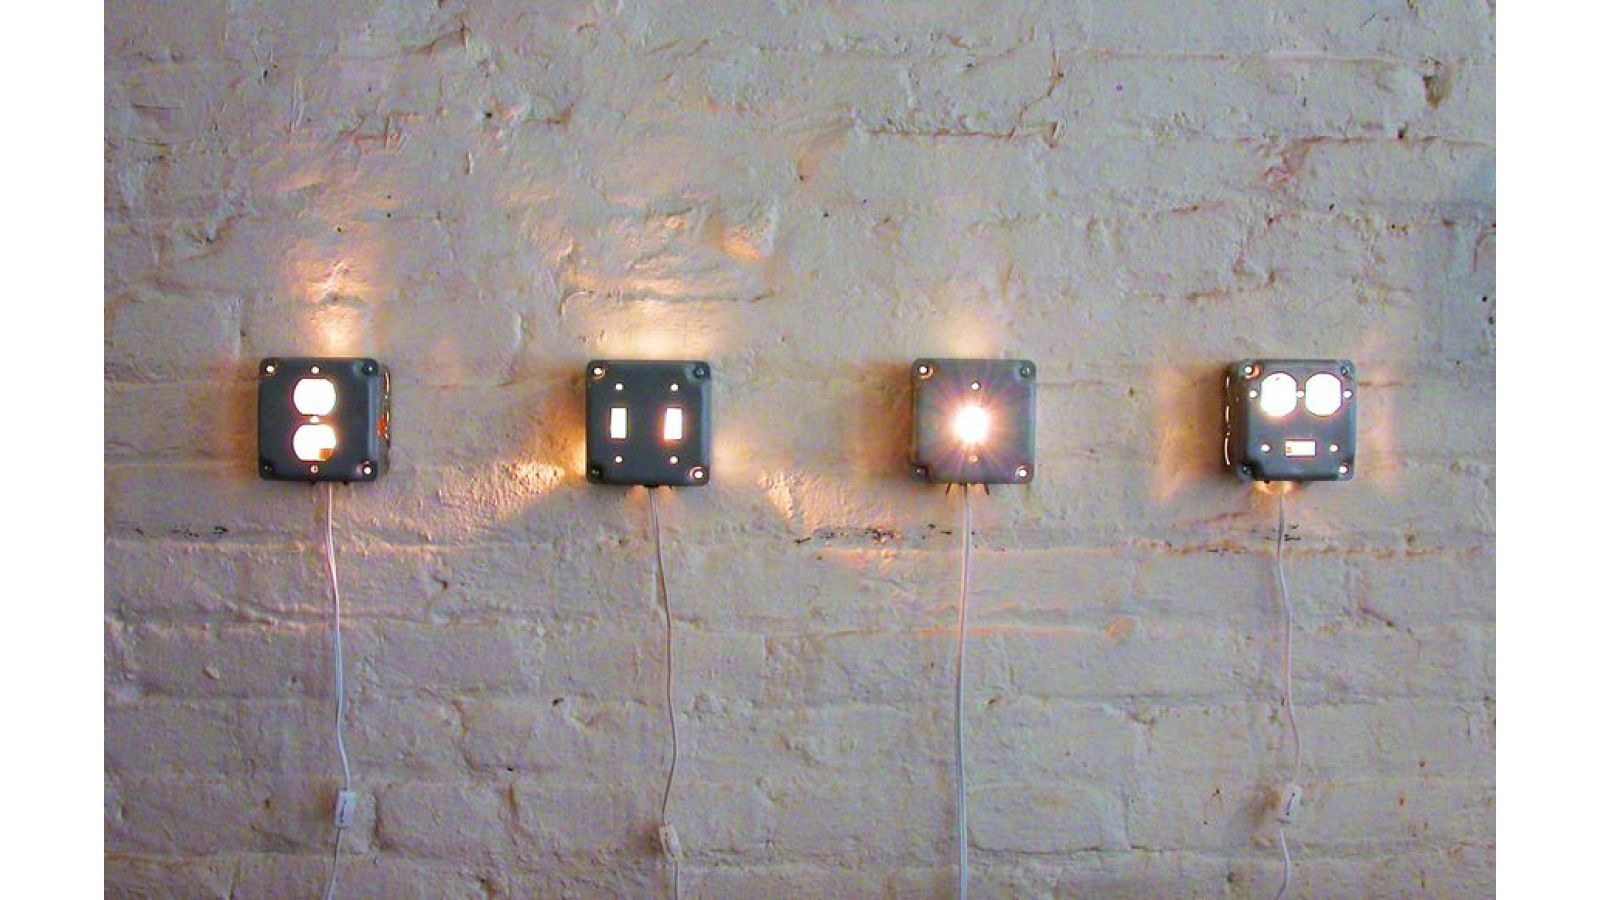 Moment Of Glory - Illuminated Wall Outlets